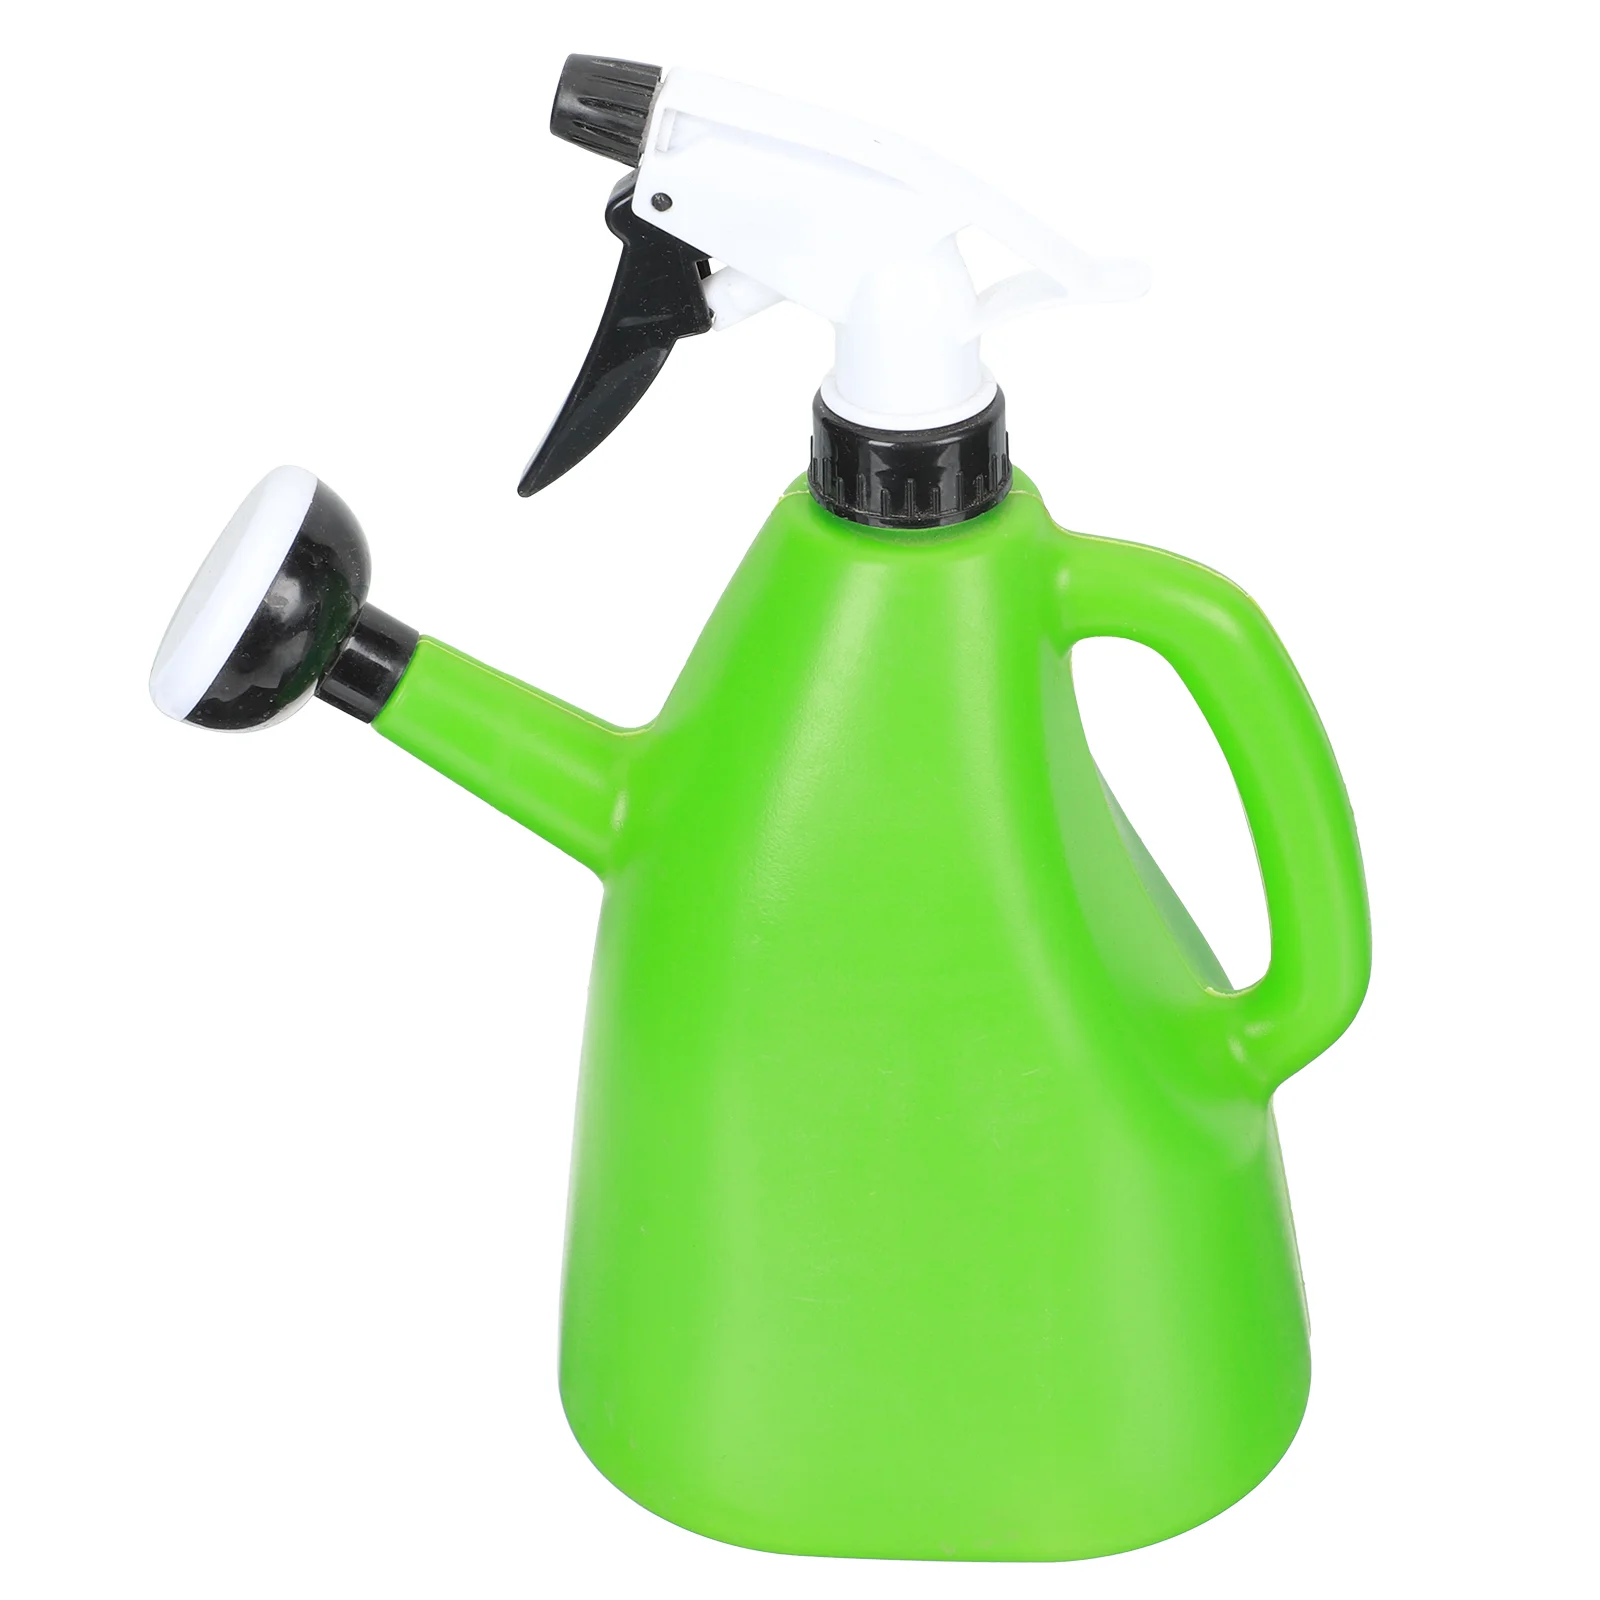 

Watering Can Kettle Durable Cans Mister Sprayer Outdoor Garden Pp Small Bottle Gardening Tool Household